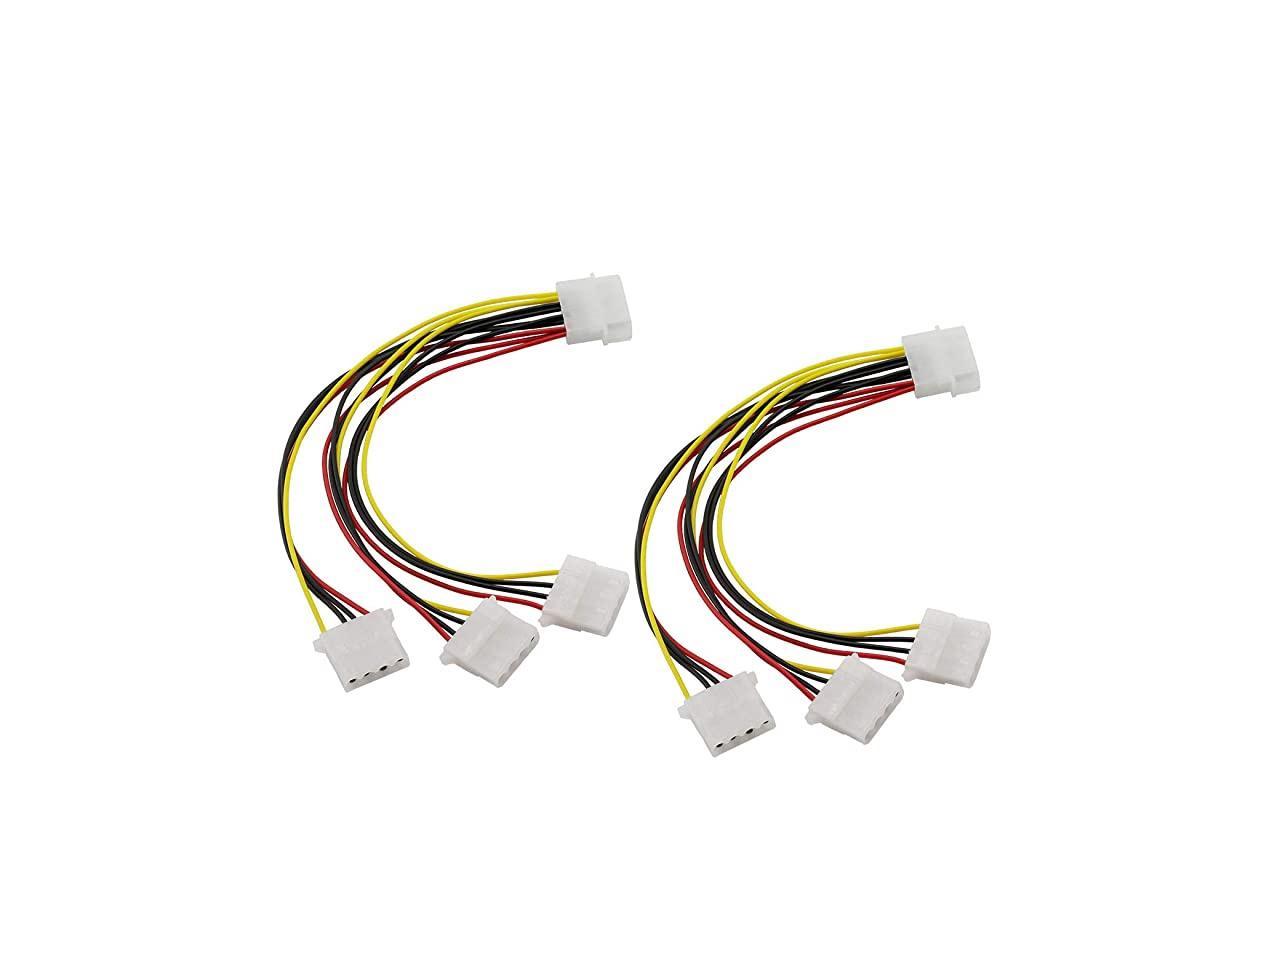 Audio adapter 12-pin Car Auto Monitor Camera DVR Male and Female 4 Pin Video Power Extension Cable Cord 2 PCS 22cm Length 